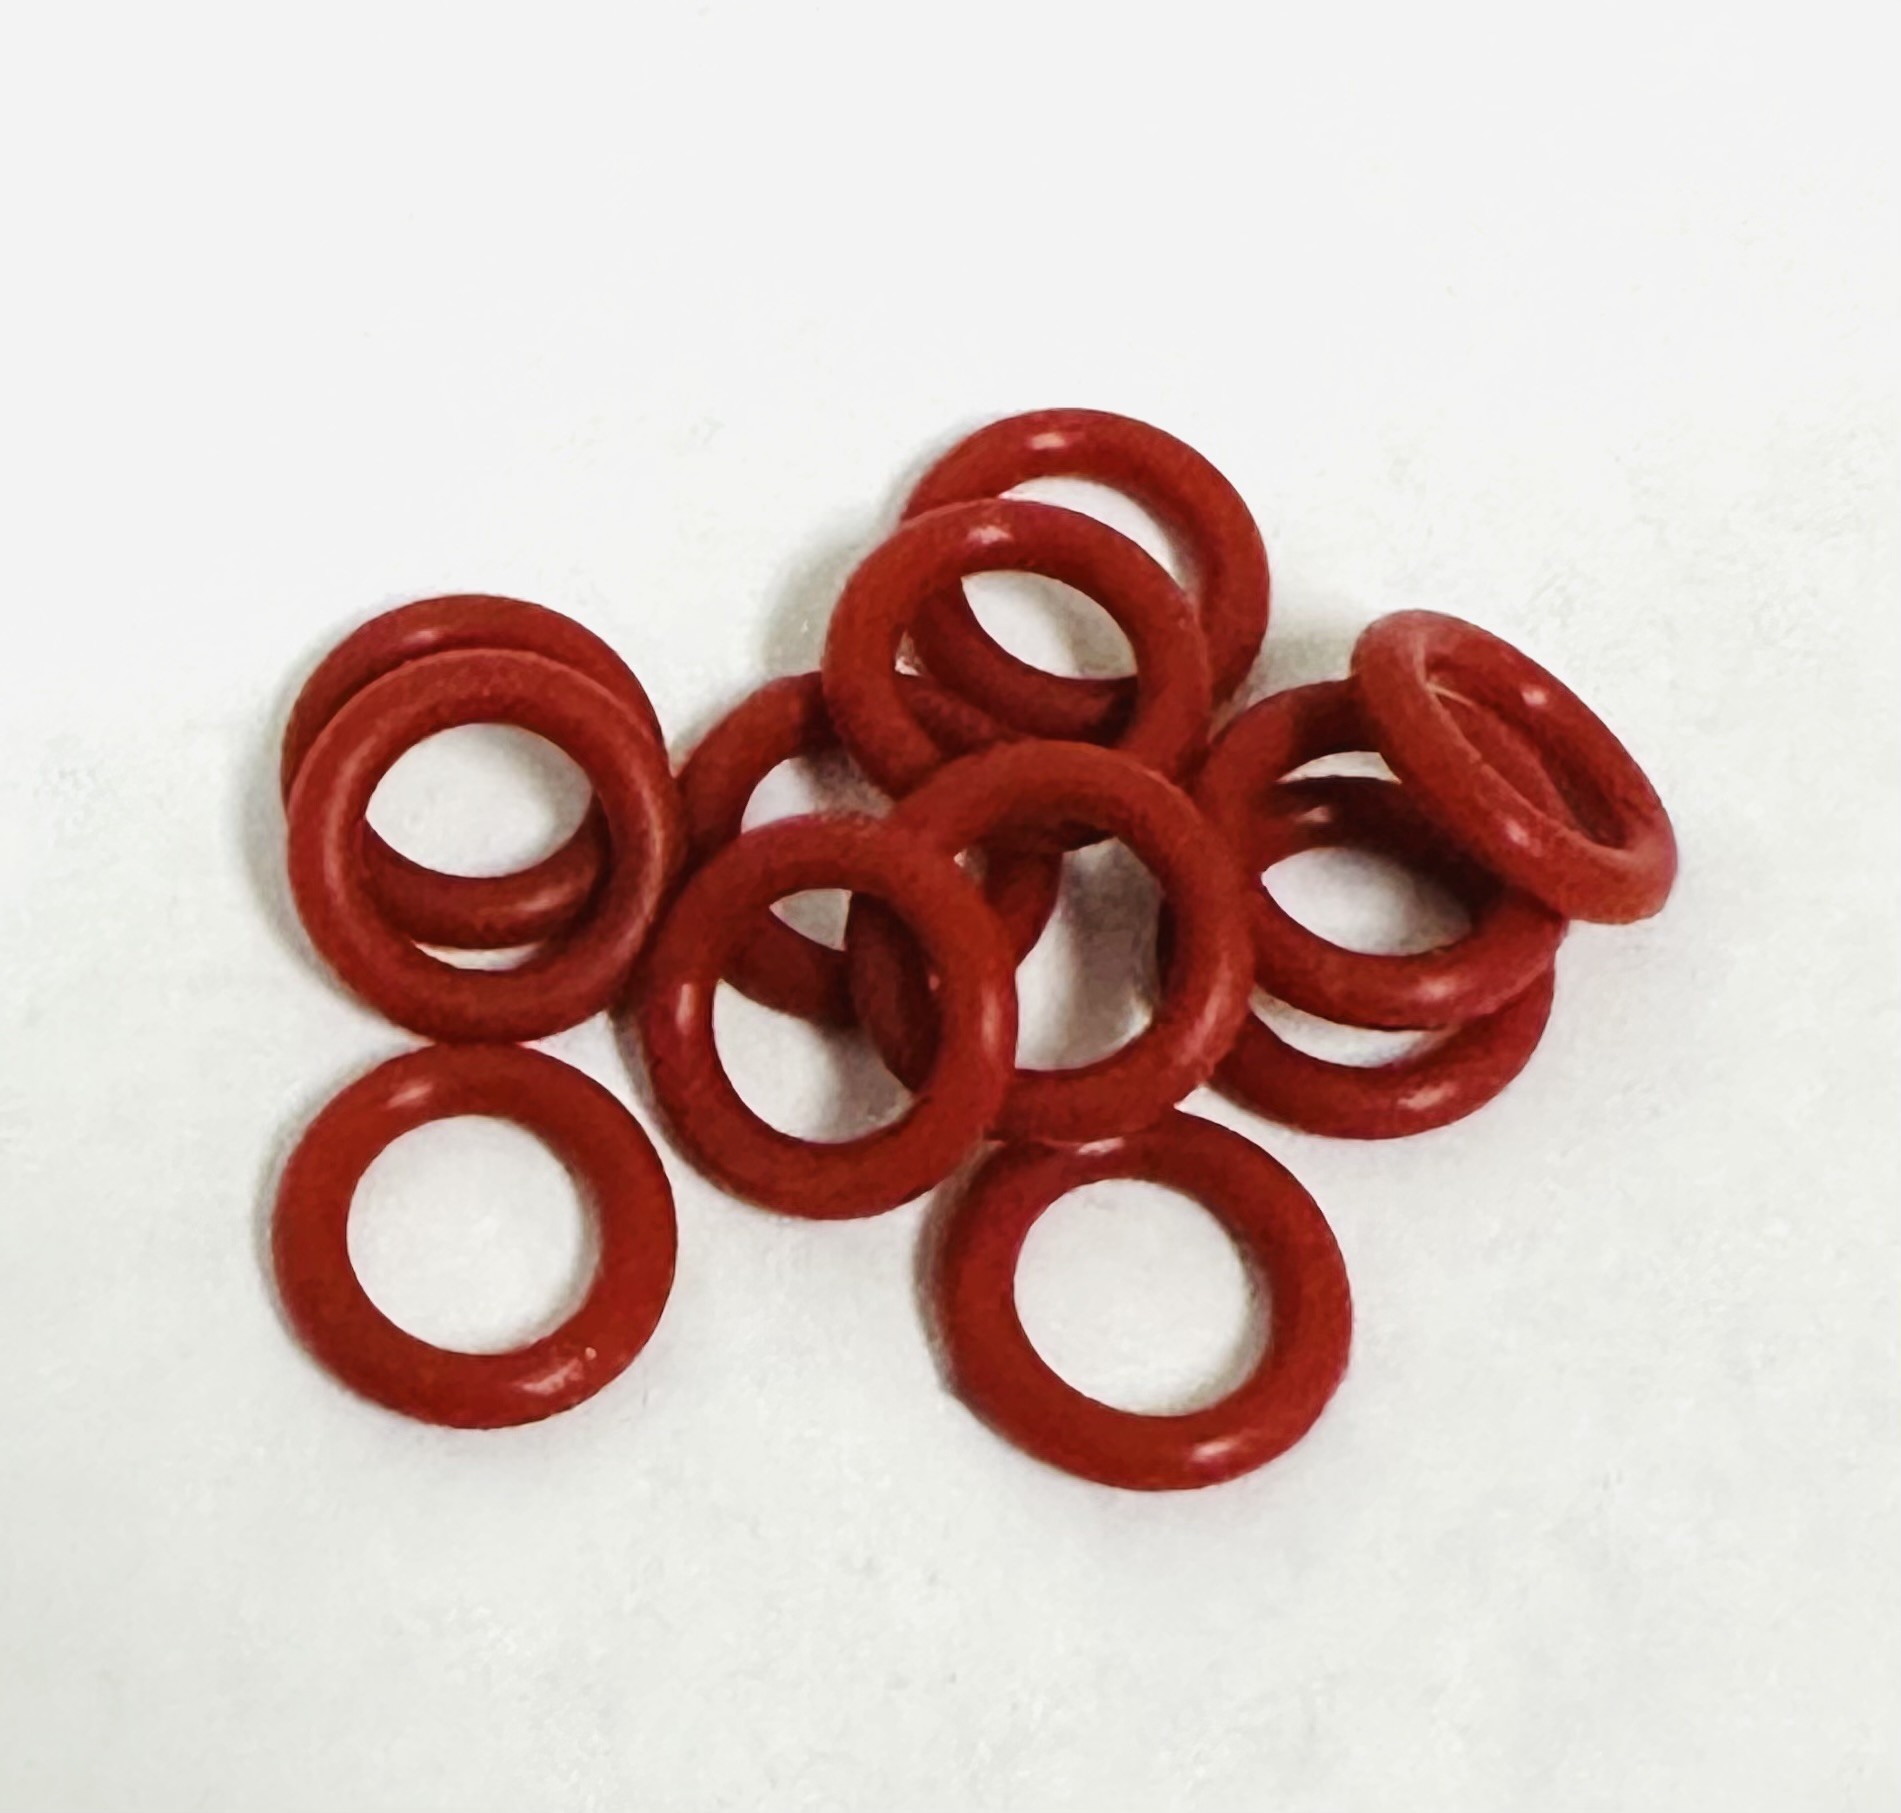 Bead Lock O-rings (12 pack) - SILICONE